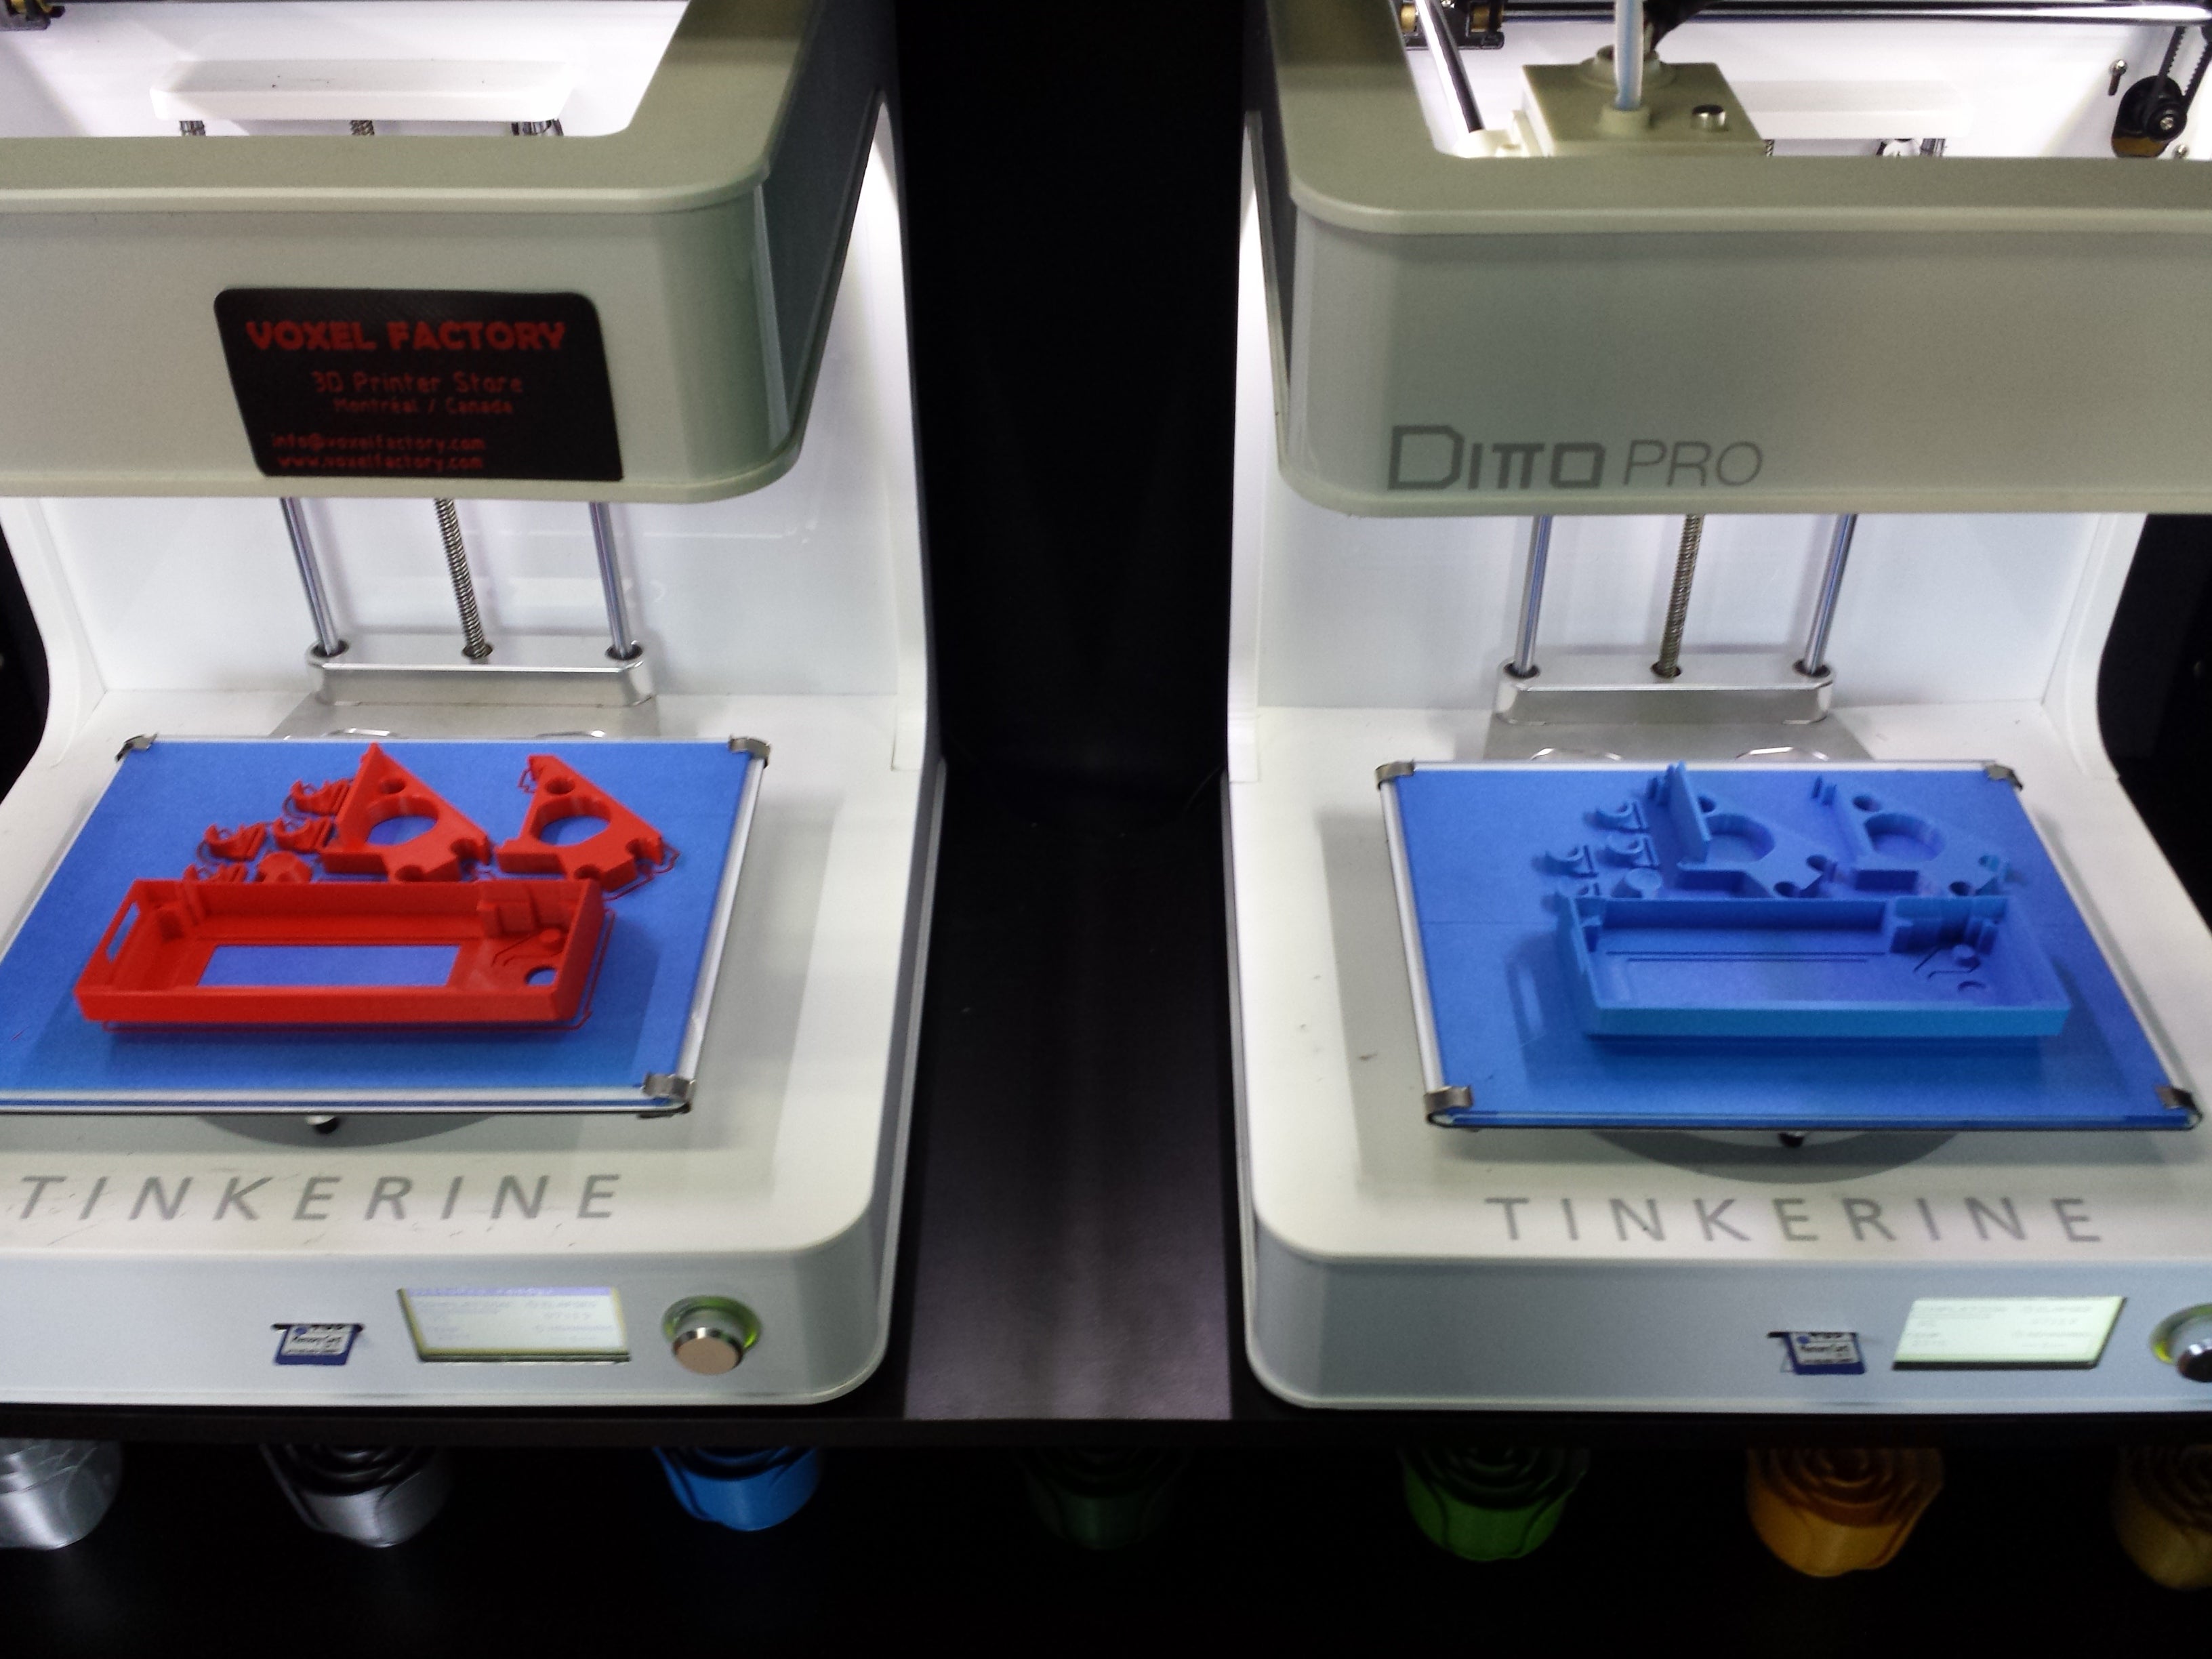 Picture of Tinkerine Ditto PRO printing Prusa i3 MK2 parts in traffic red and sky blue